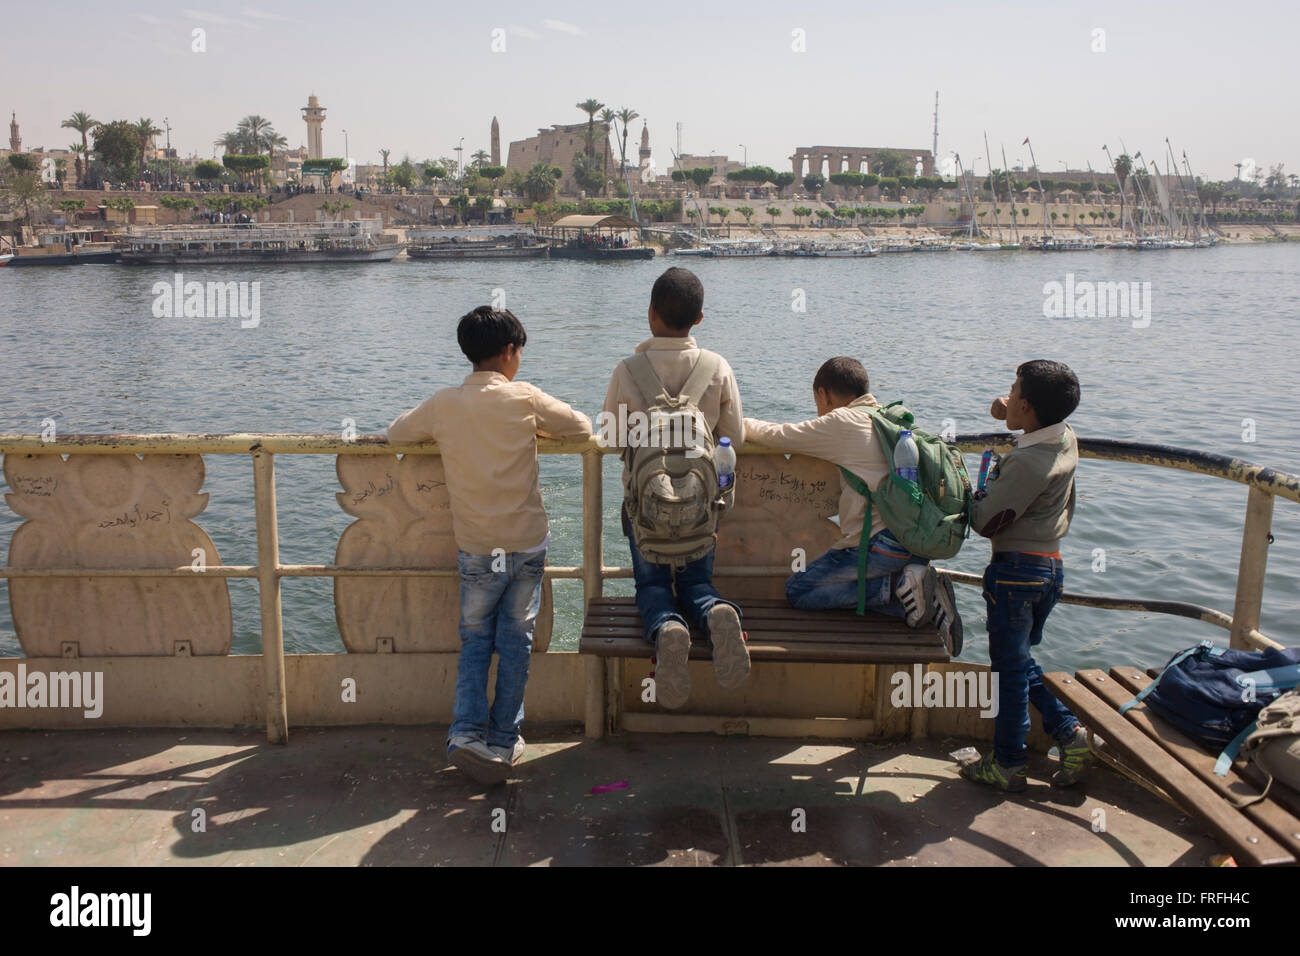 Schoolboys stand on the top deck of the state-run ferry across the River Nile at Luxor, Nile Valley, Egypt. Stock Photo